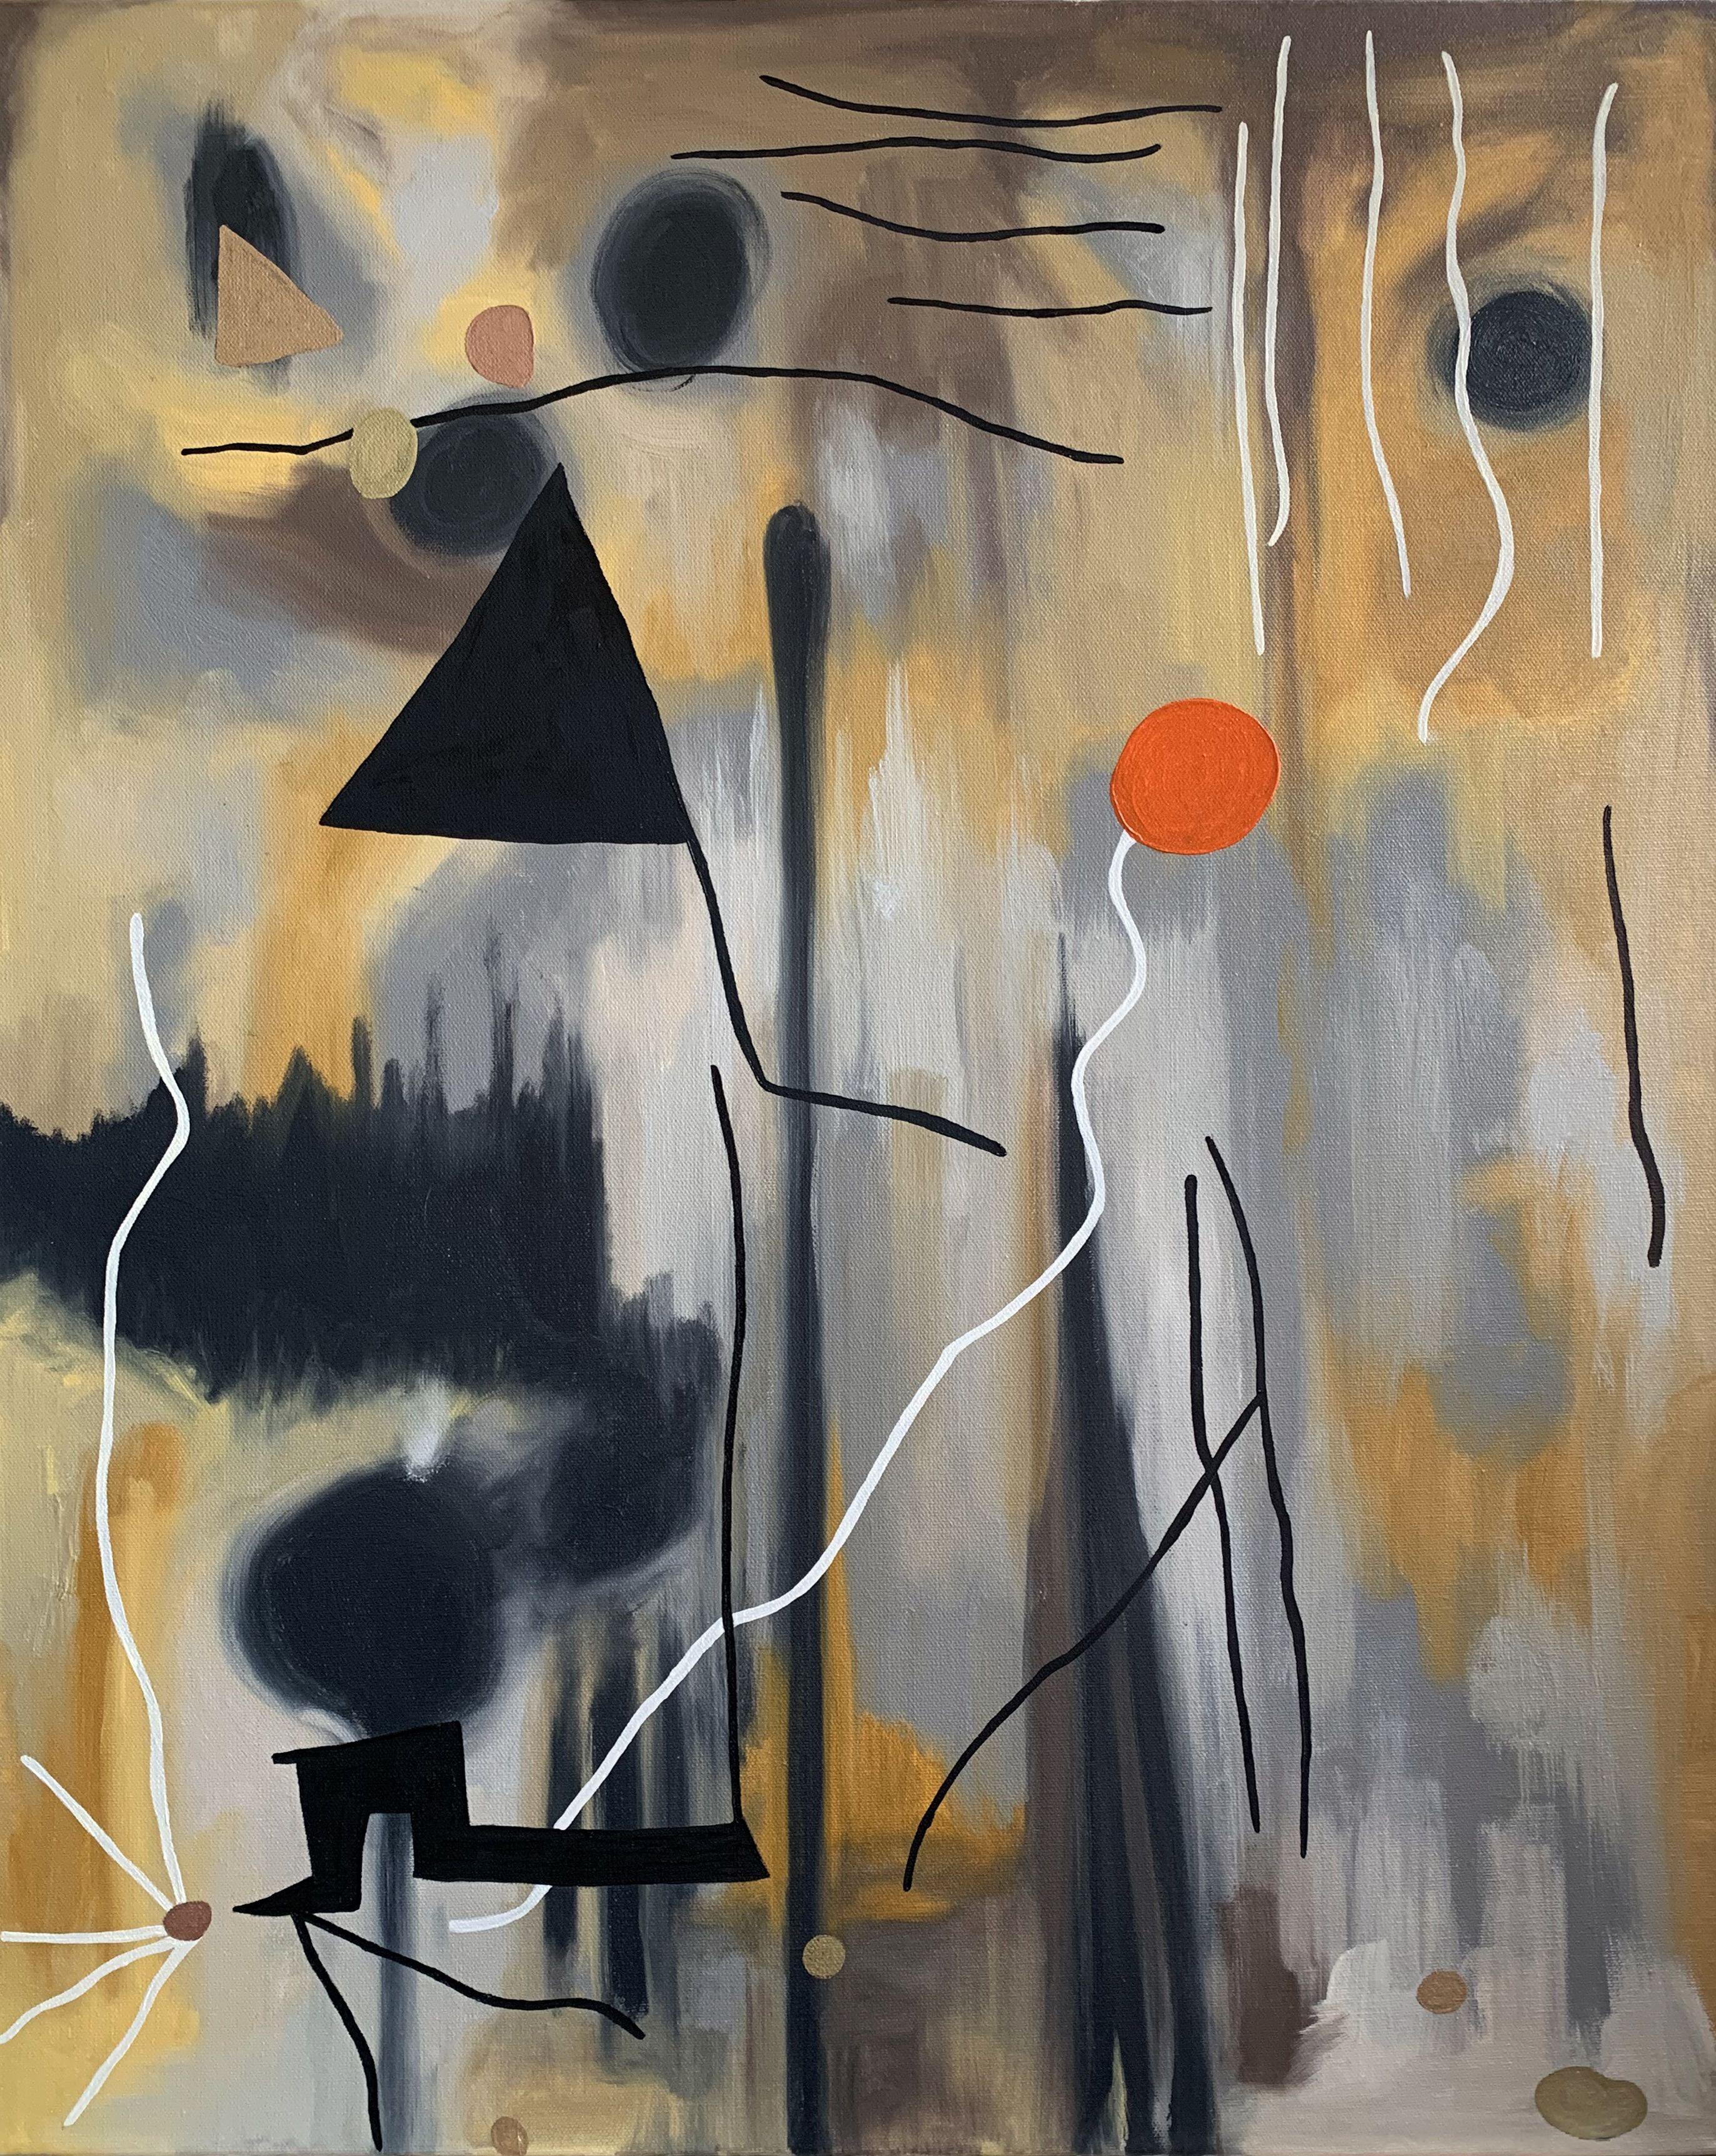 Created for the show "A Retro-ish Perspective" in June 2022, this piece is modeled after the original 1925 oil on canvas painting by Joan Miro.     He said it acts as "'a sort of genesis'â€”the amorphous beginnings of life". I relate to it in the